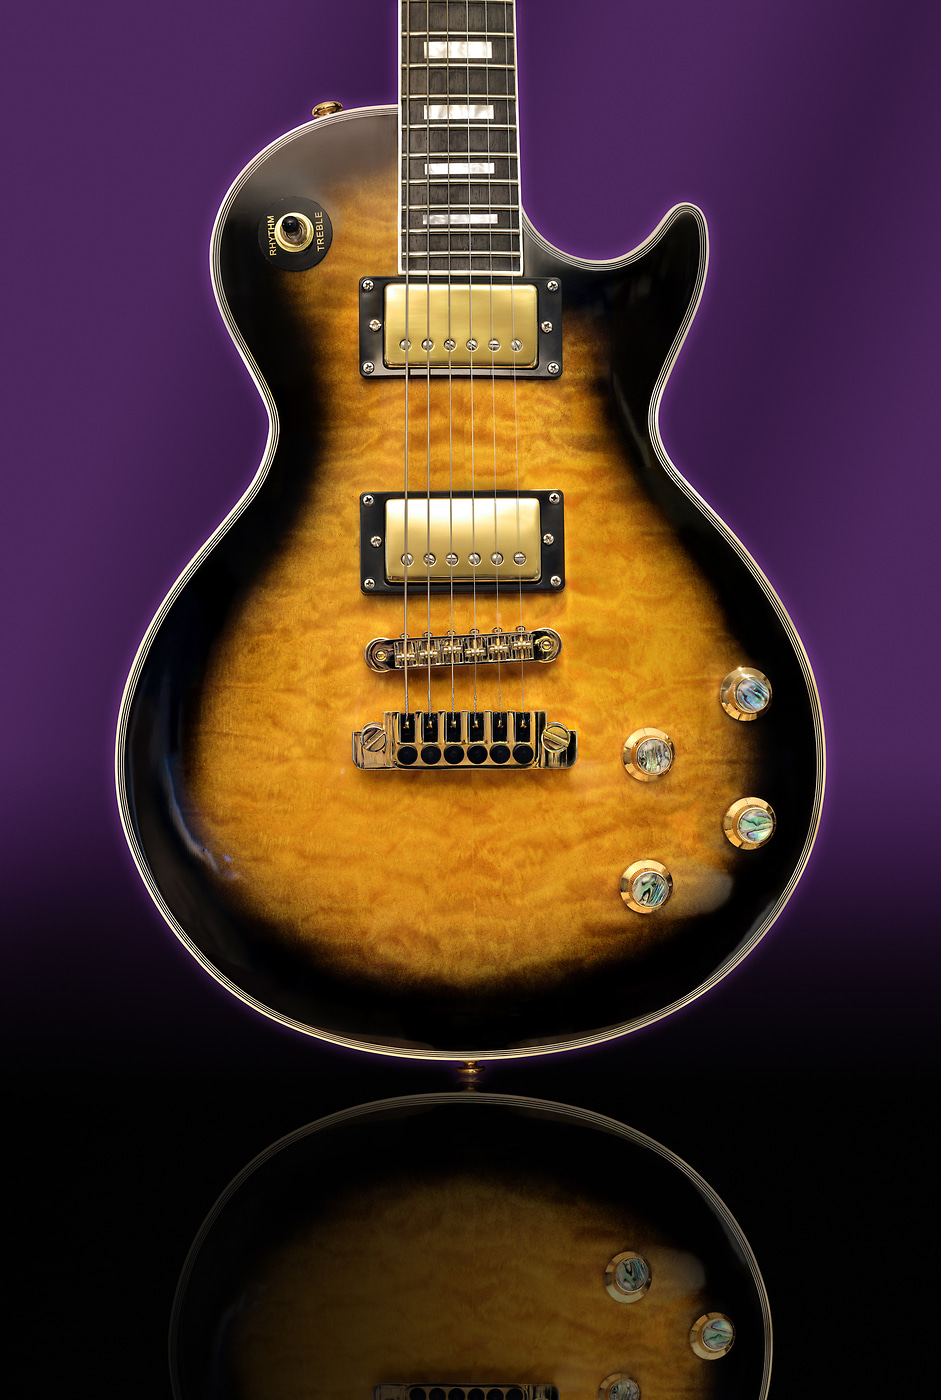 238 megapixels! A very high resolution artistic photograph of a Gibson Les Paul guitar; VAST photo created by Phil Crawshay.